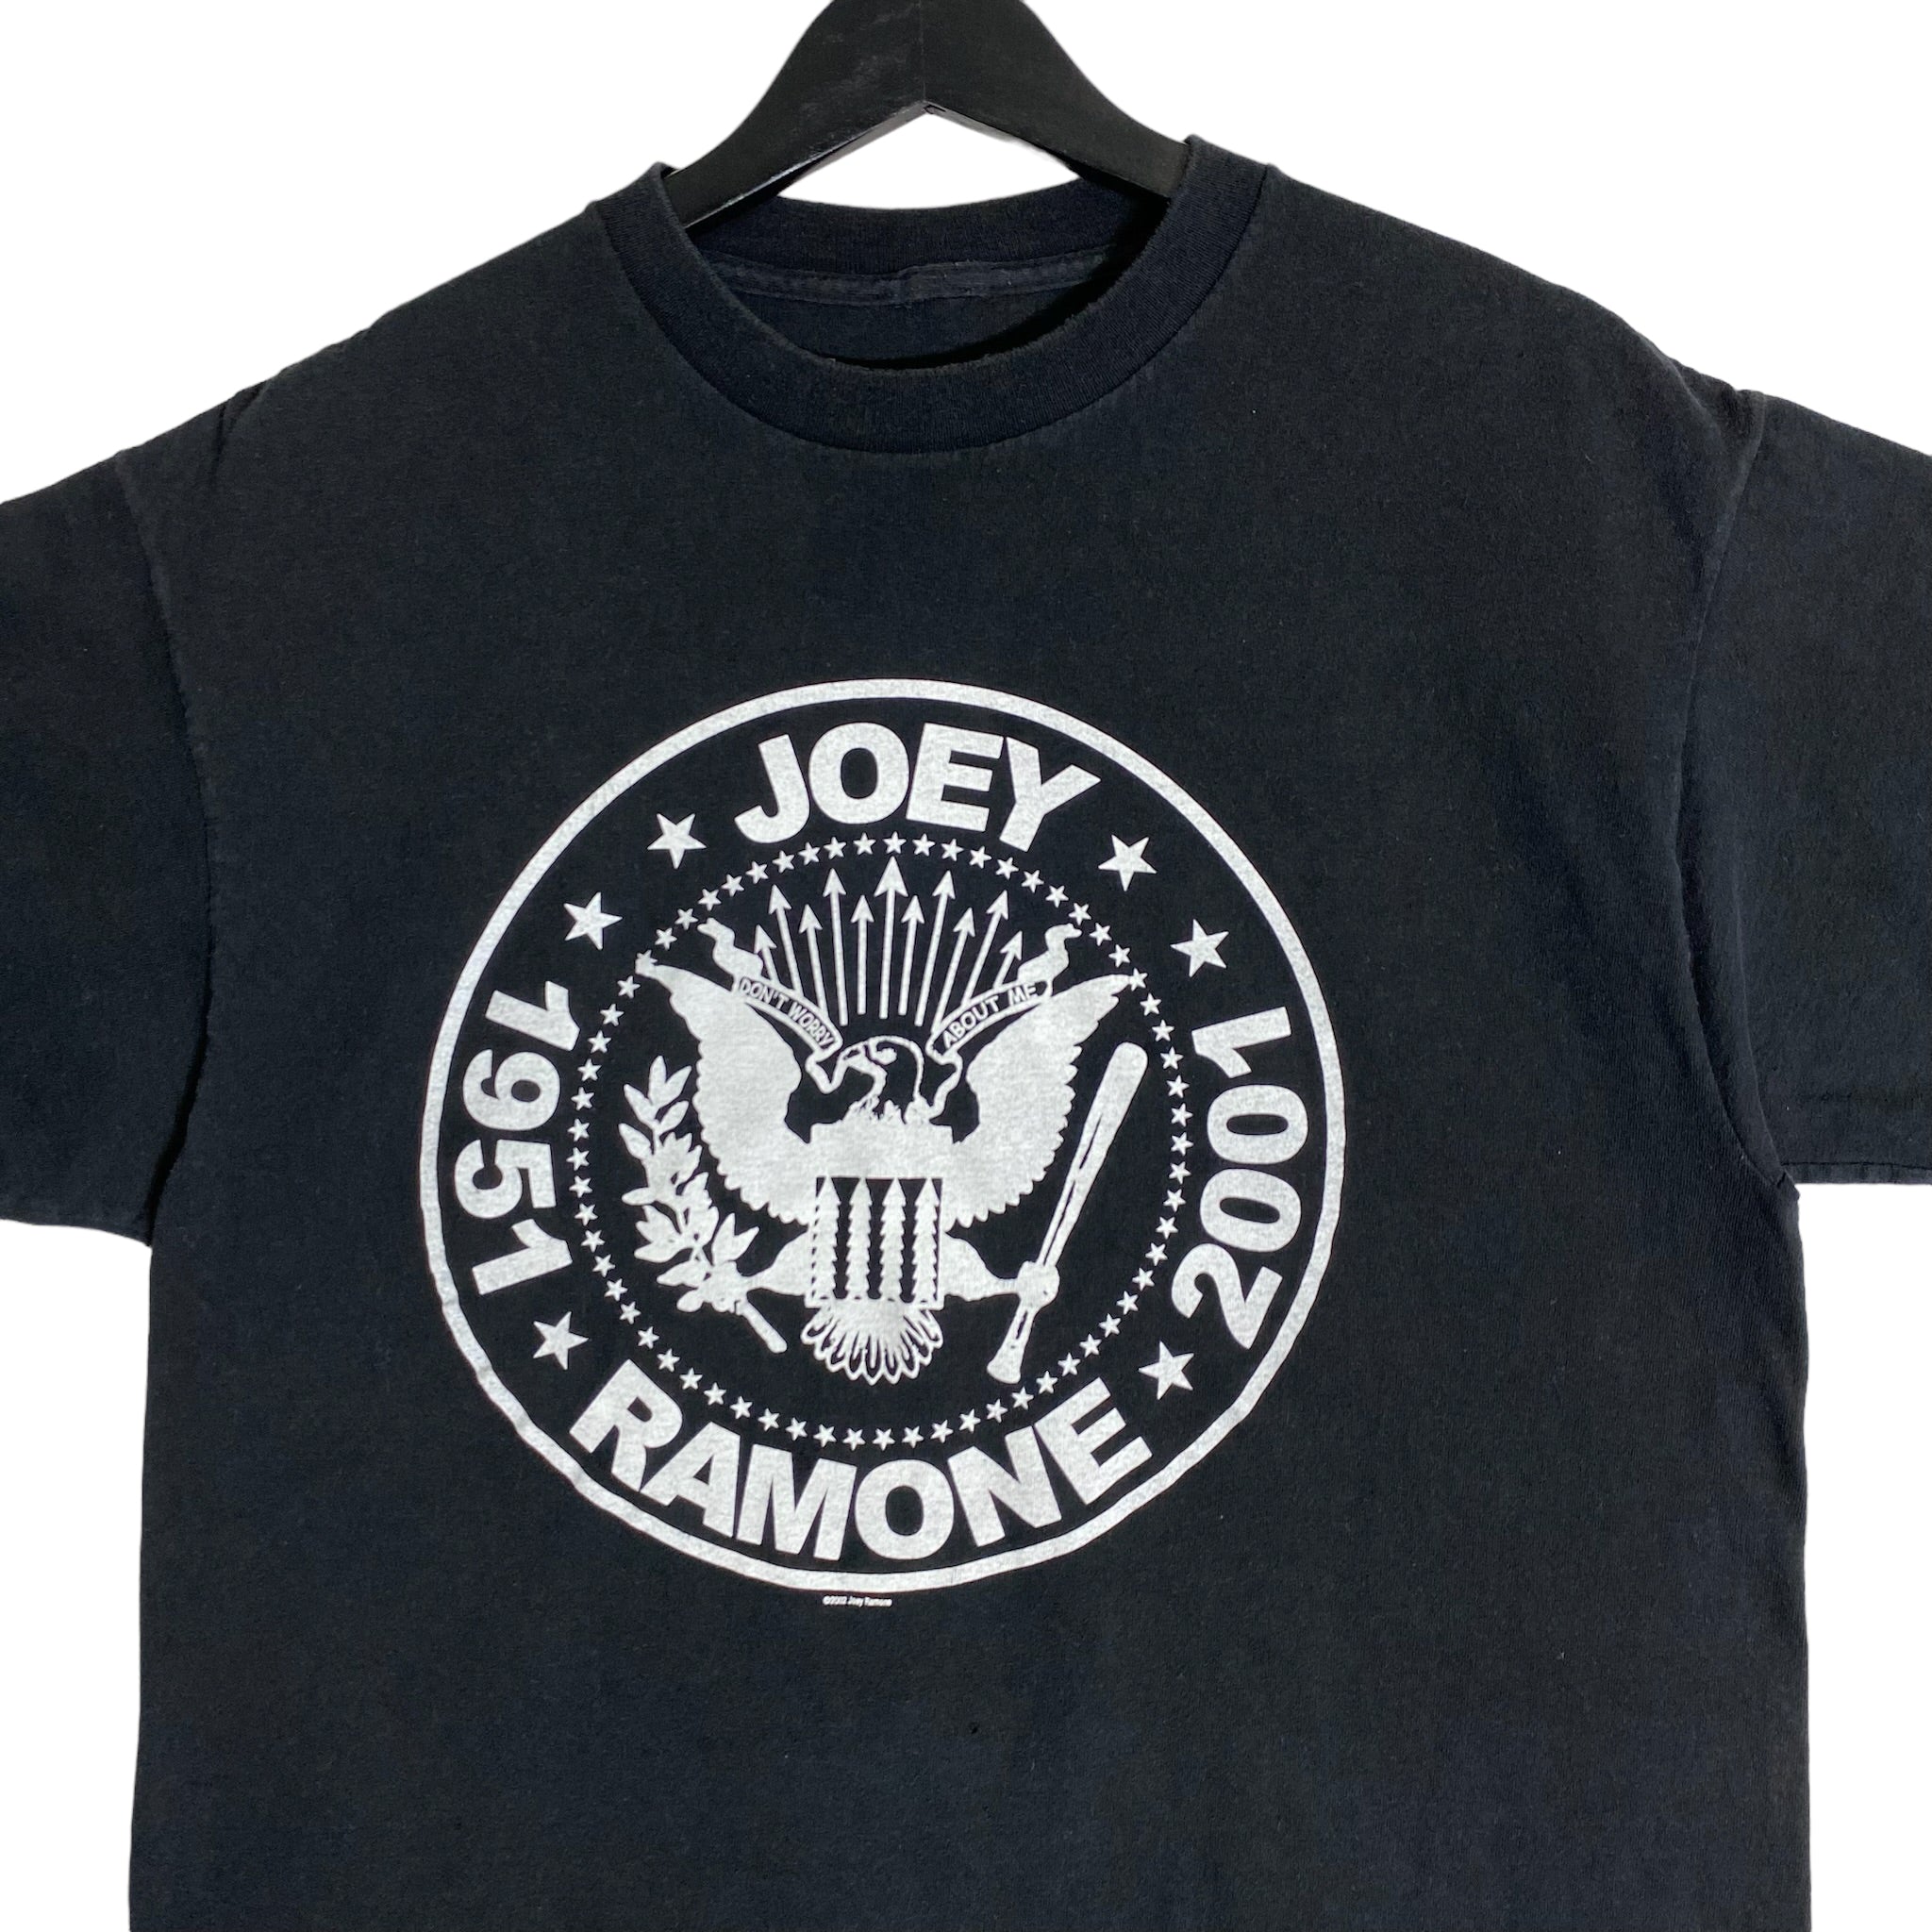 Vintage Joey Ramone "Don't Worry About Me" Tee 2001